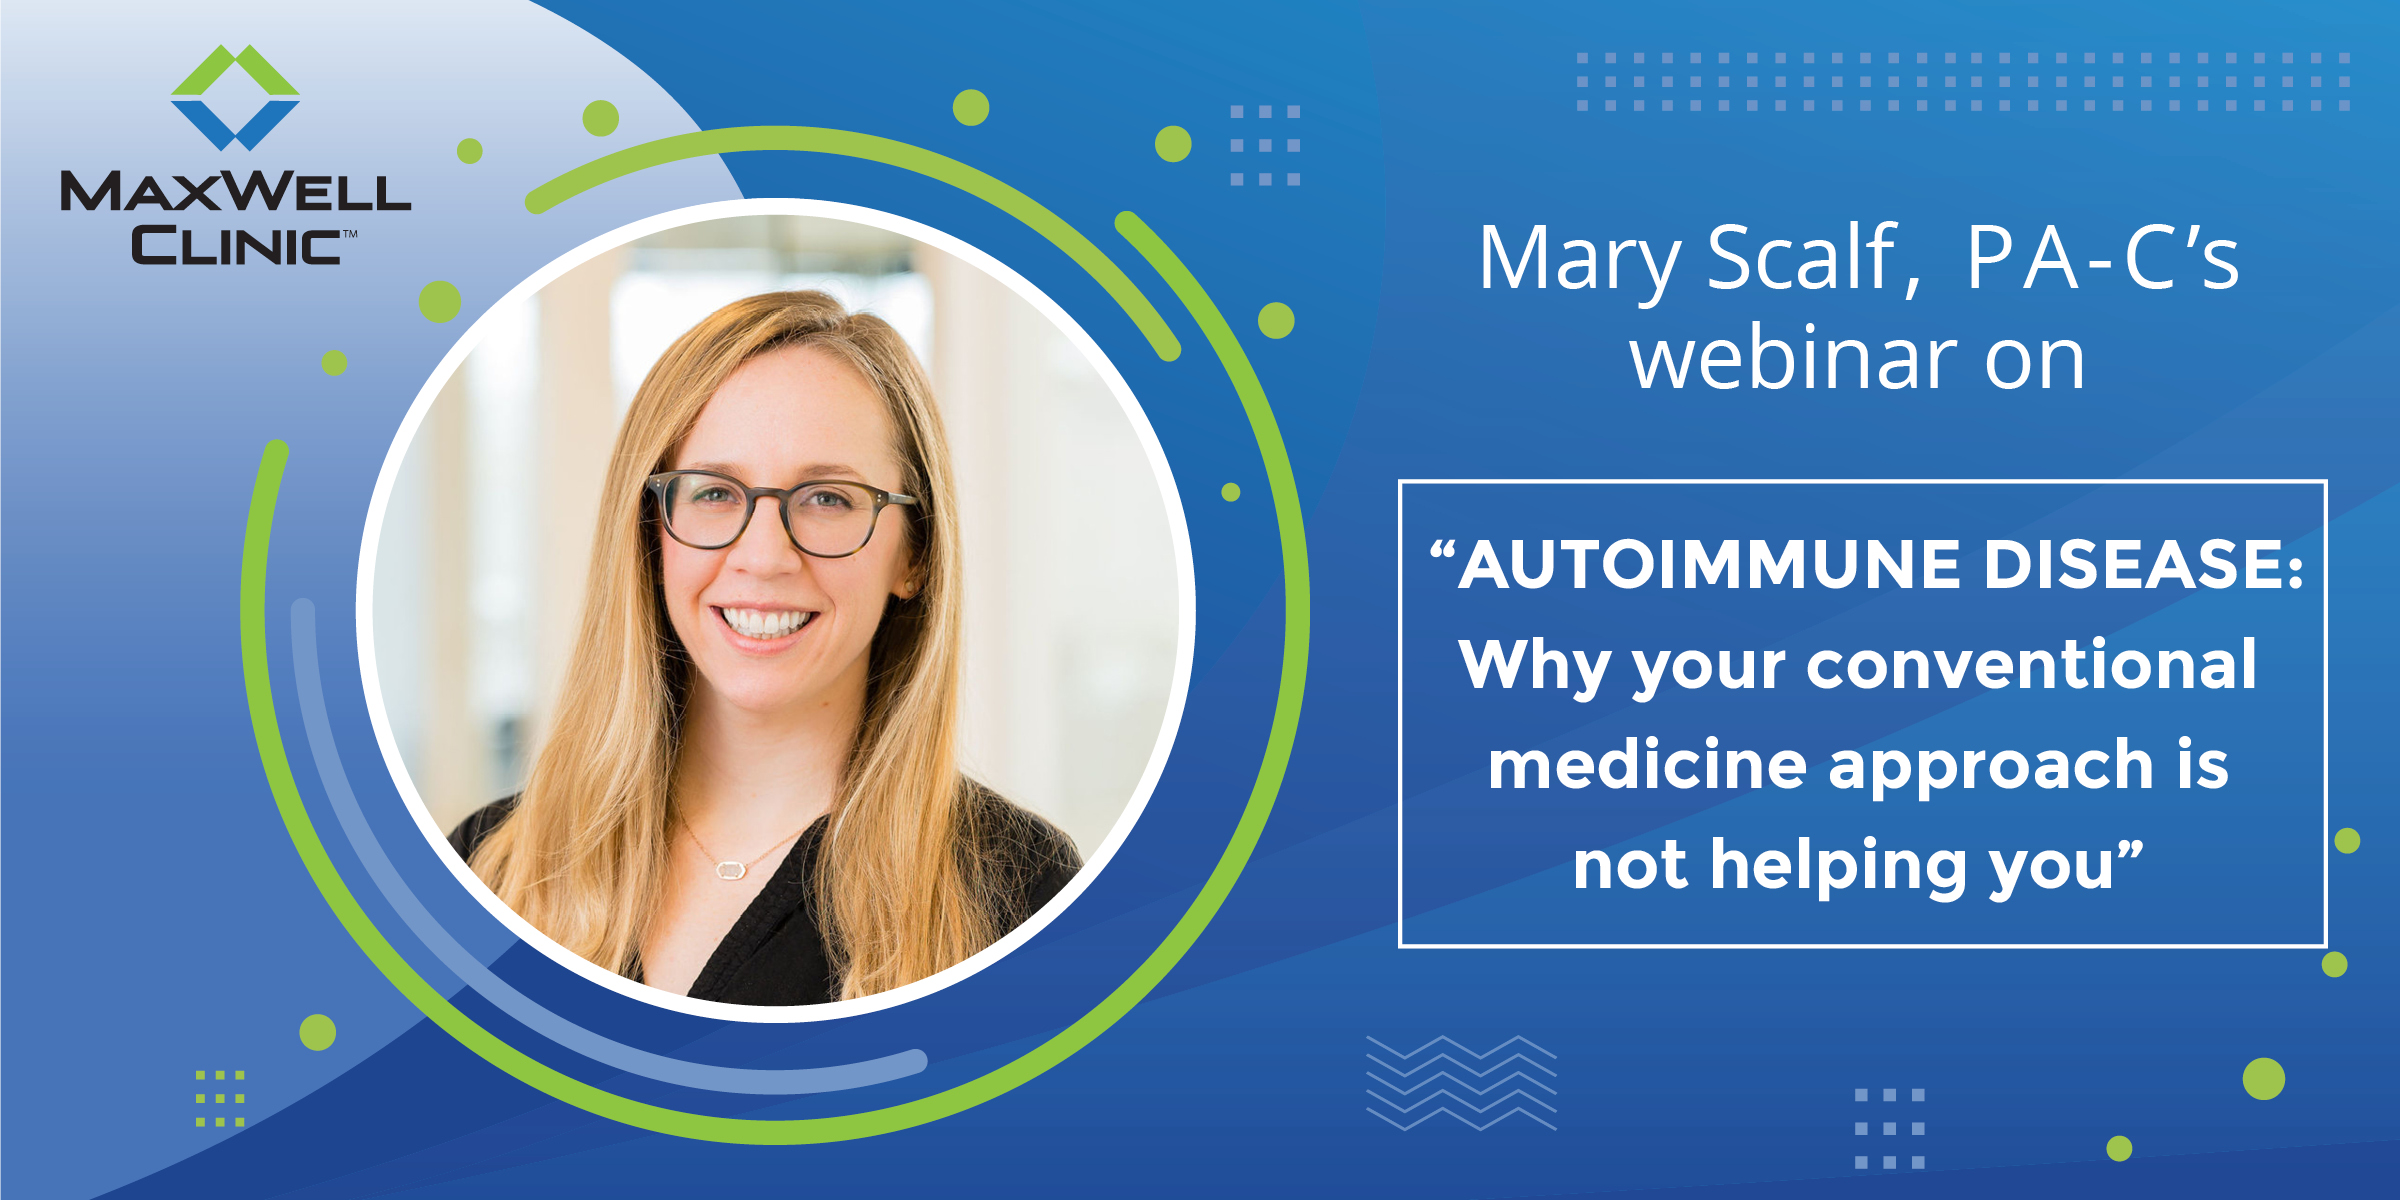 Autoimmune Disease: Why Your Conventional Medicine Approach is Not Helping You with Mary Scalf, PA-C